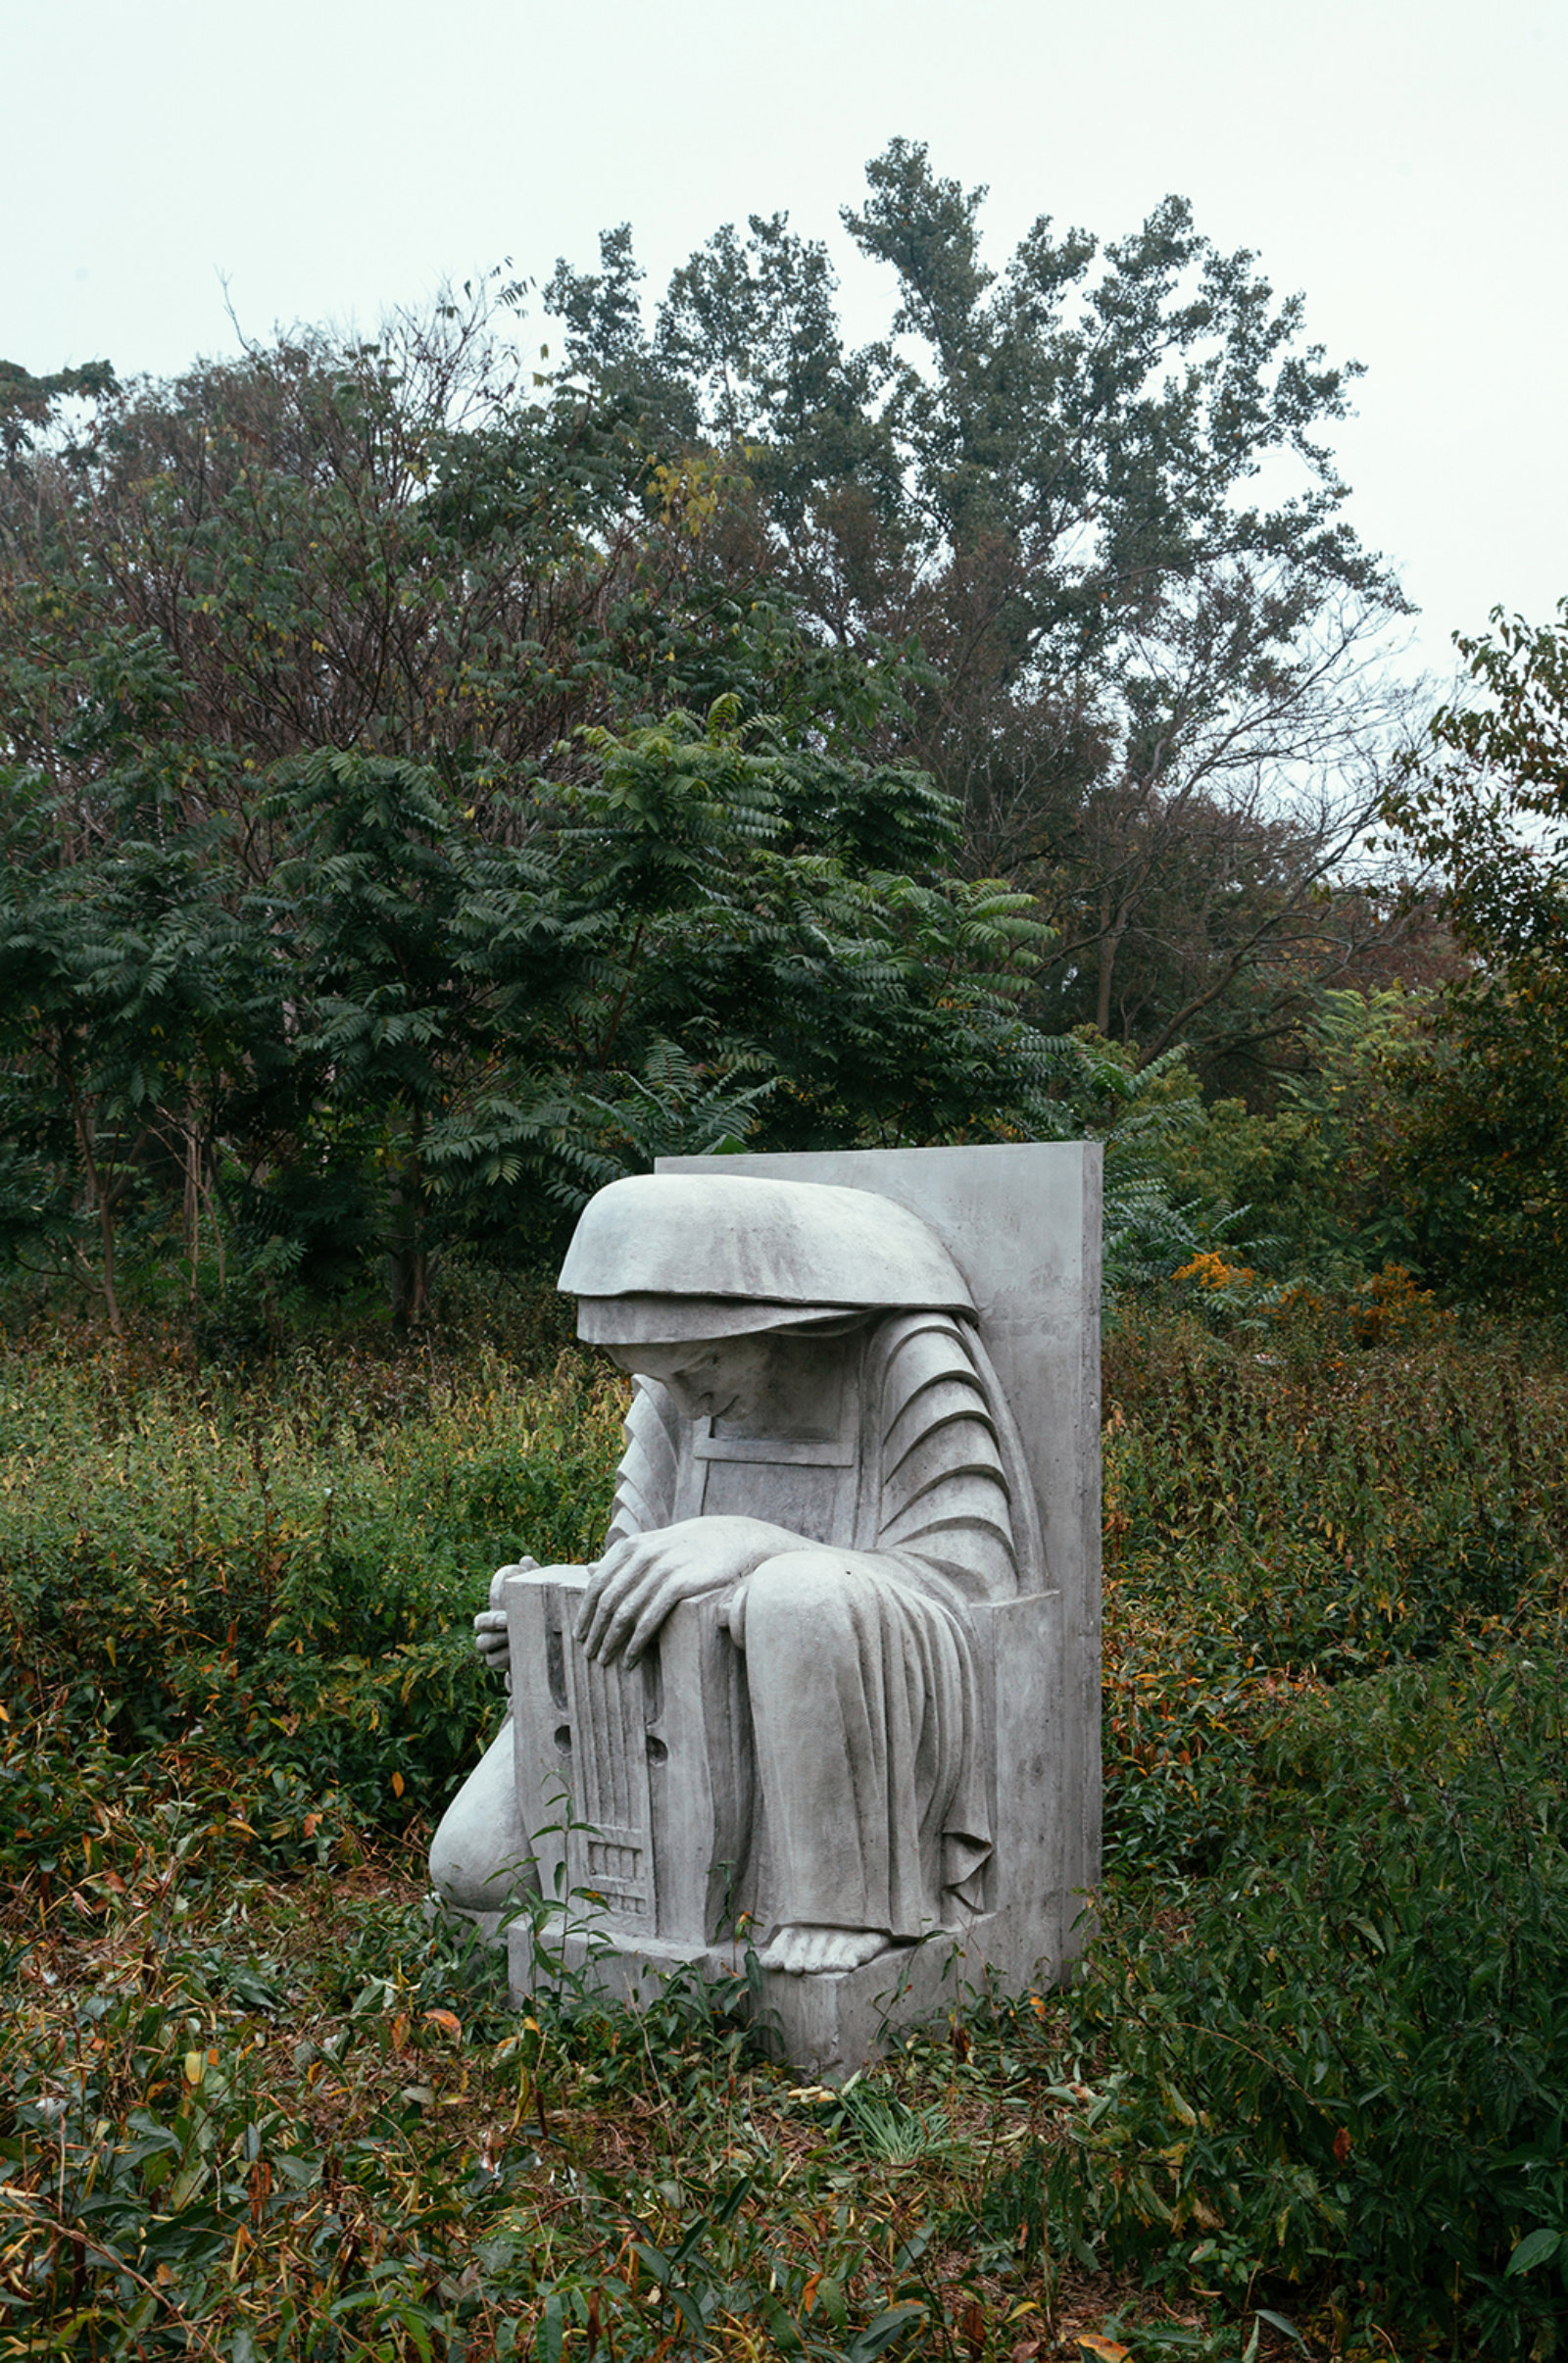 Duane Linklater, Monsters for Beauty, Permanence and Individuality, 2017, 14 cast concrete sculptures, dimensions variable. Installation view, Lower Don River Trail, Don River Valley Park, Toronto, 2017